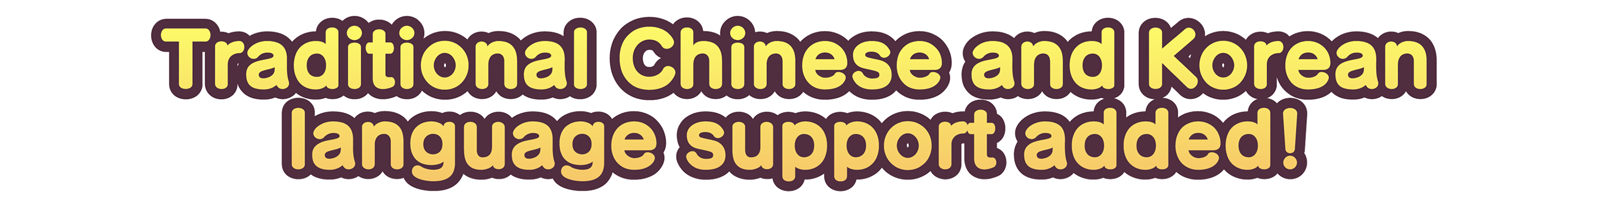 Traditional Chinese and Korean language support added!